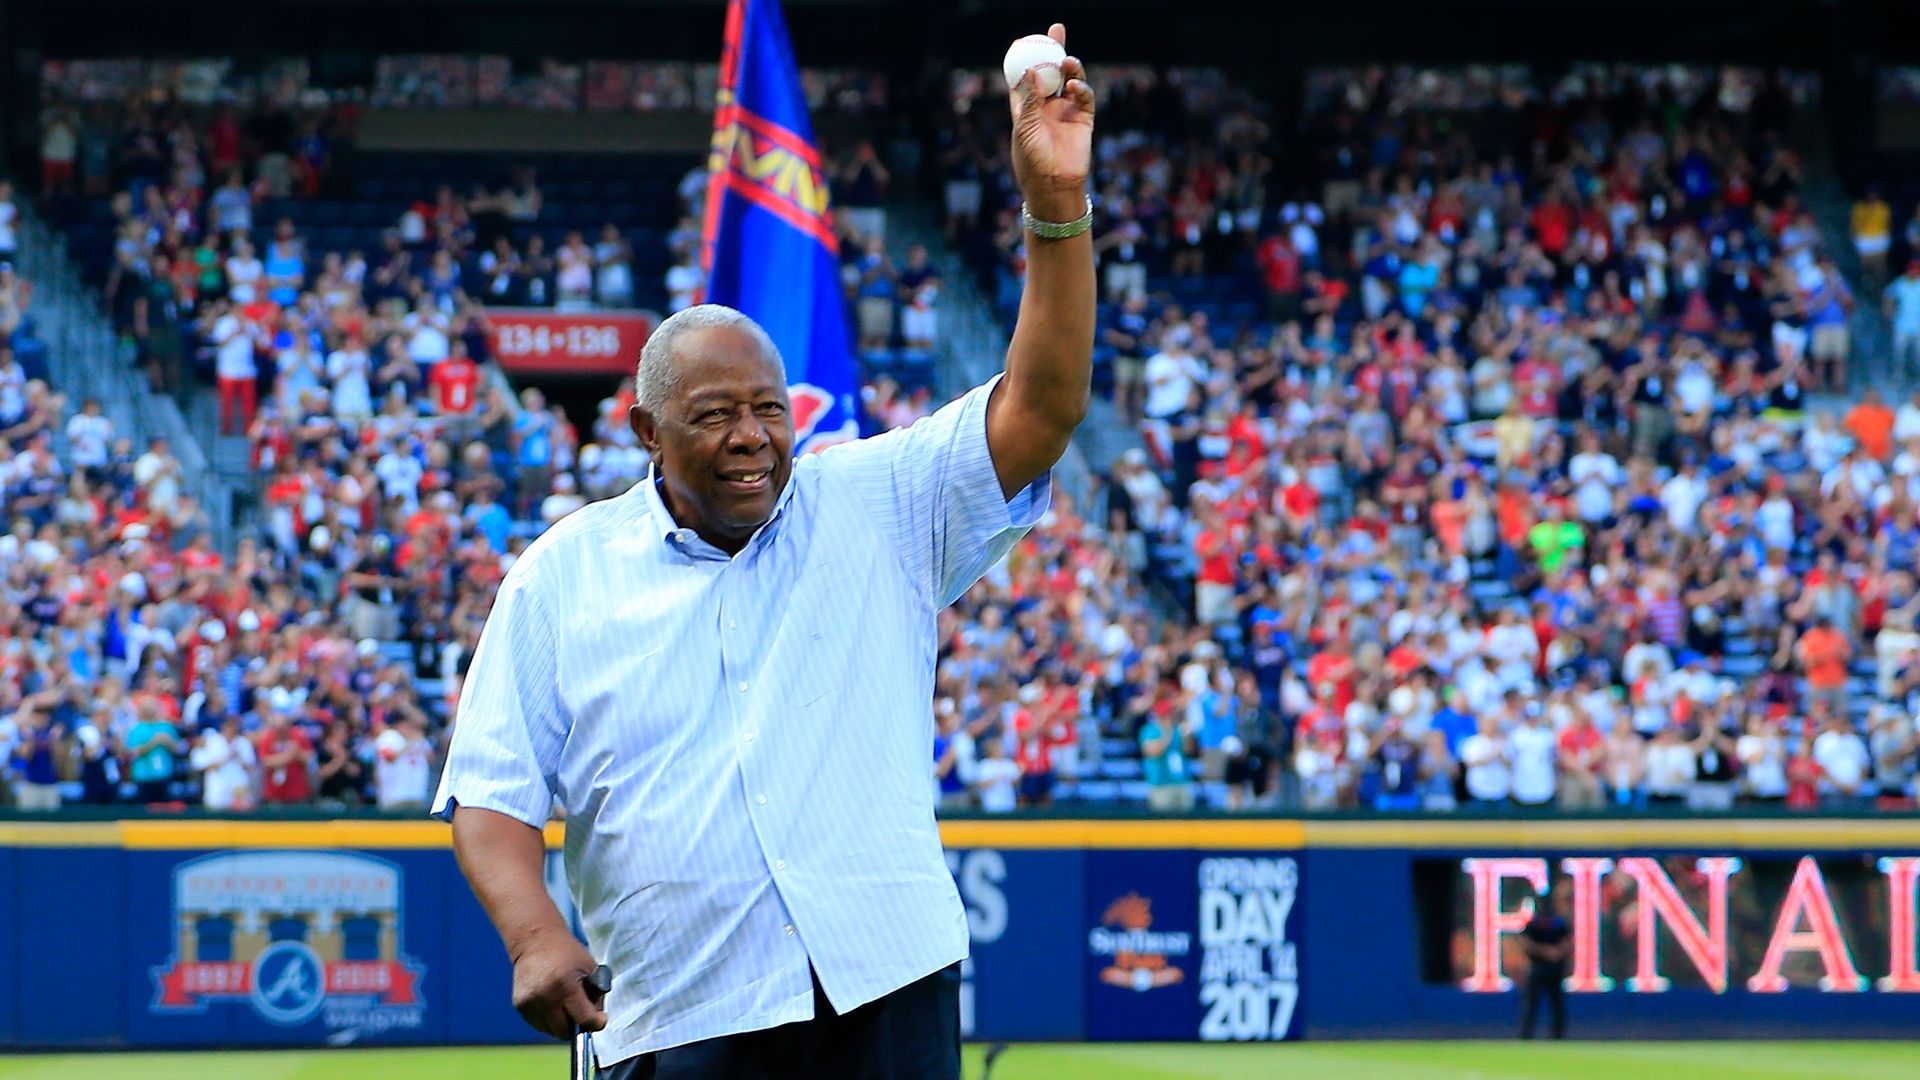 Hall of Famer Hank Aaron throws out the ceremonial last pitch at Turner Field to Bobby Cox after the game in 2016